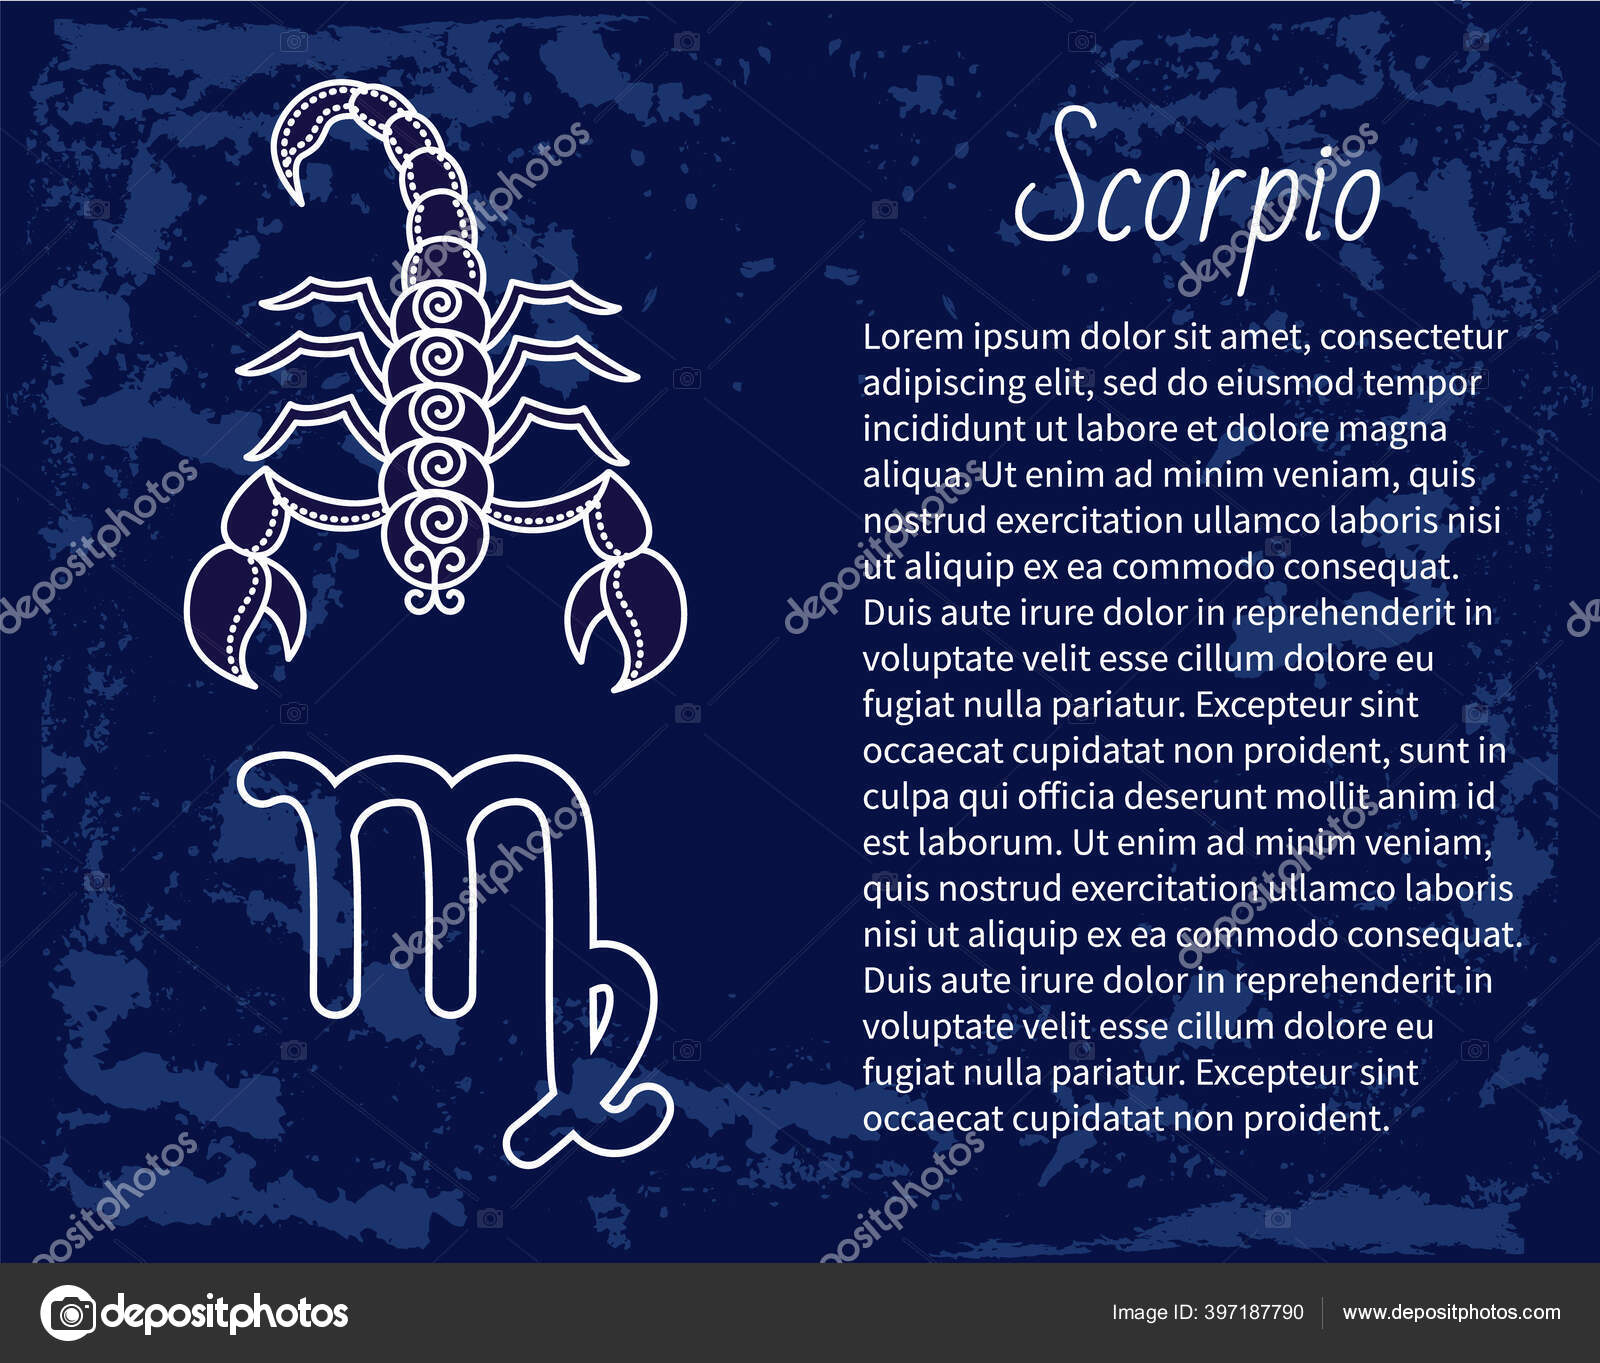 Scorpio Zodiac Sign Astrology and Horoscope Vector Stock Vector by ...